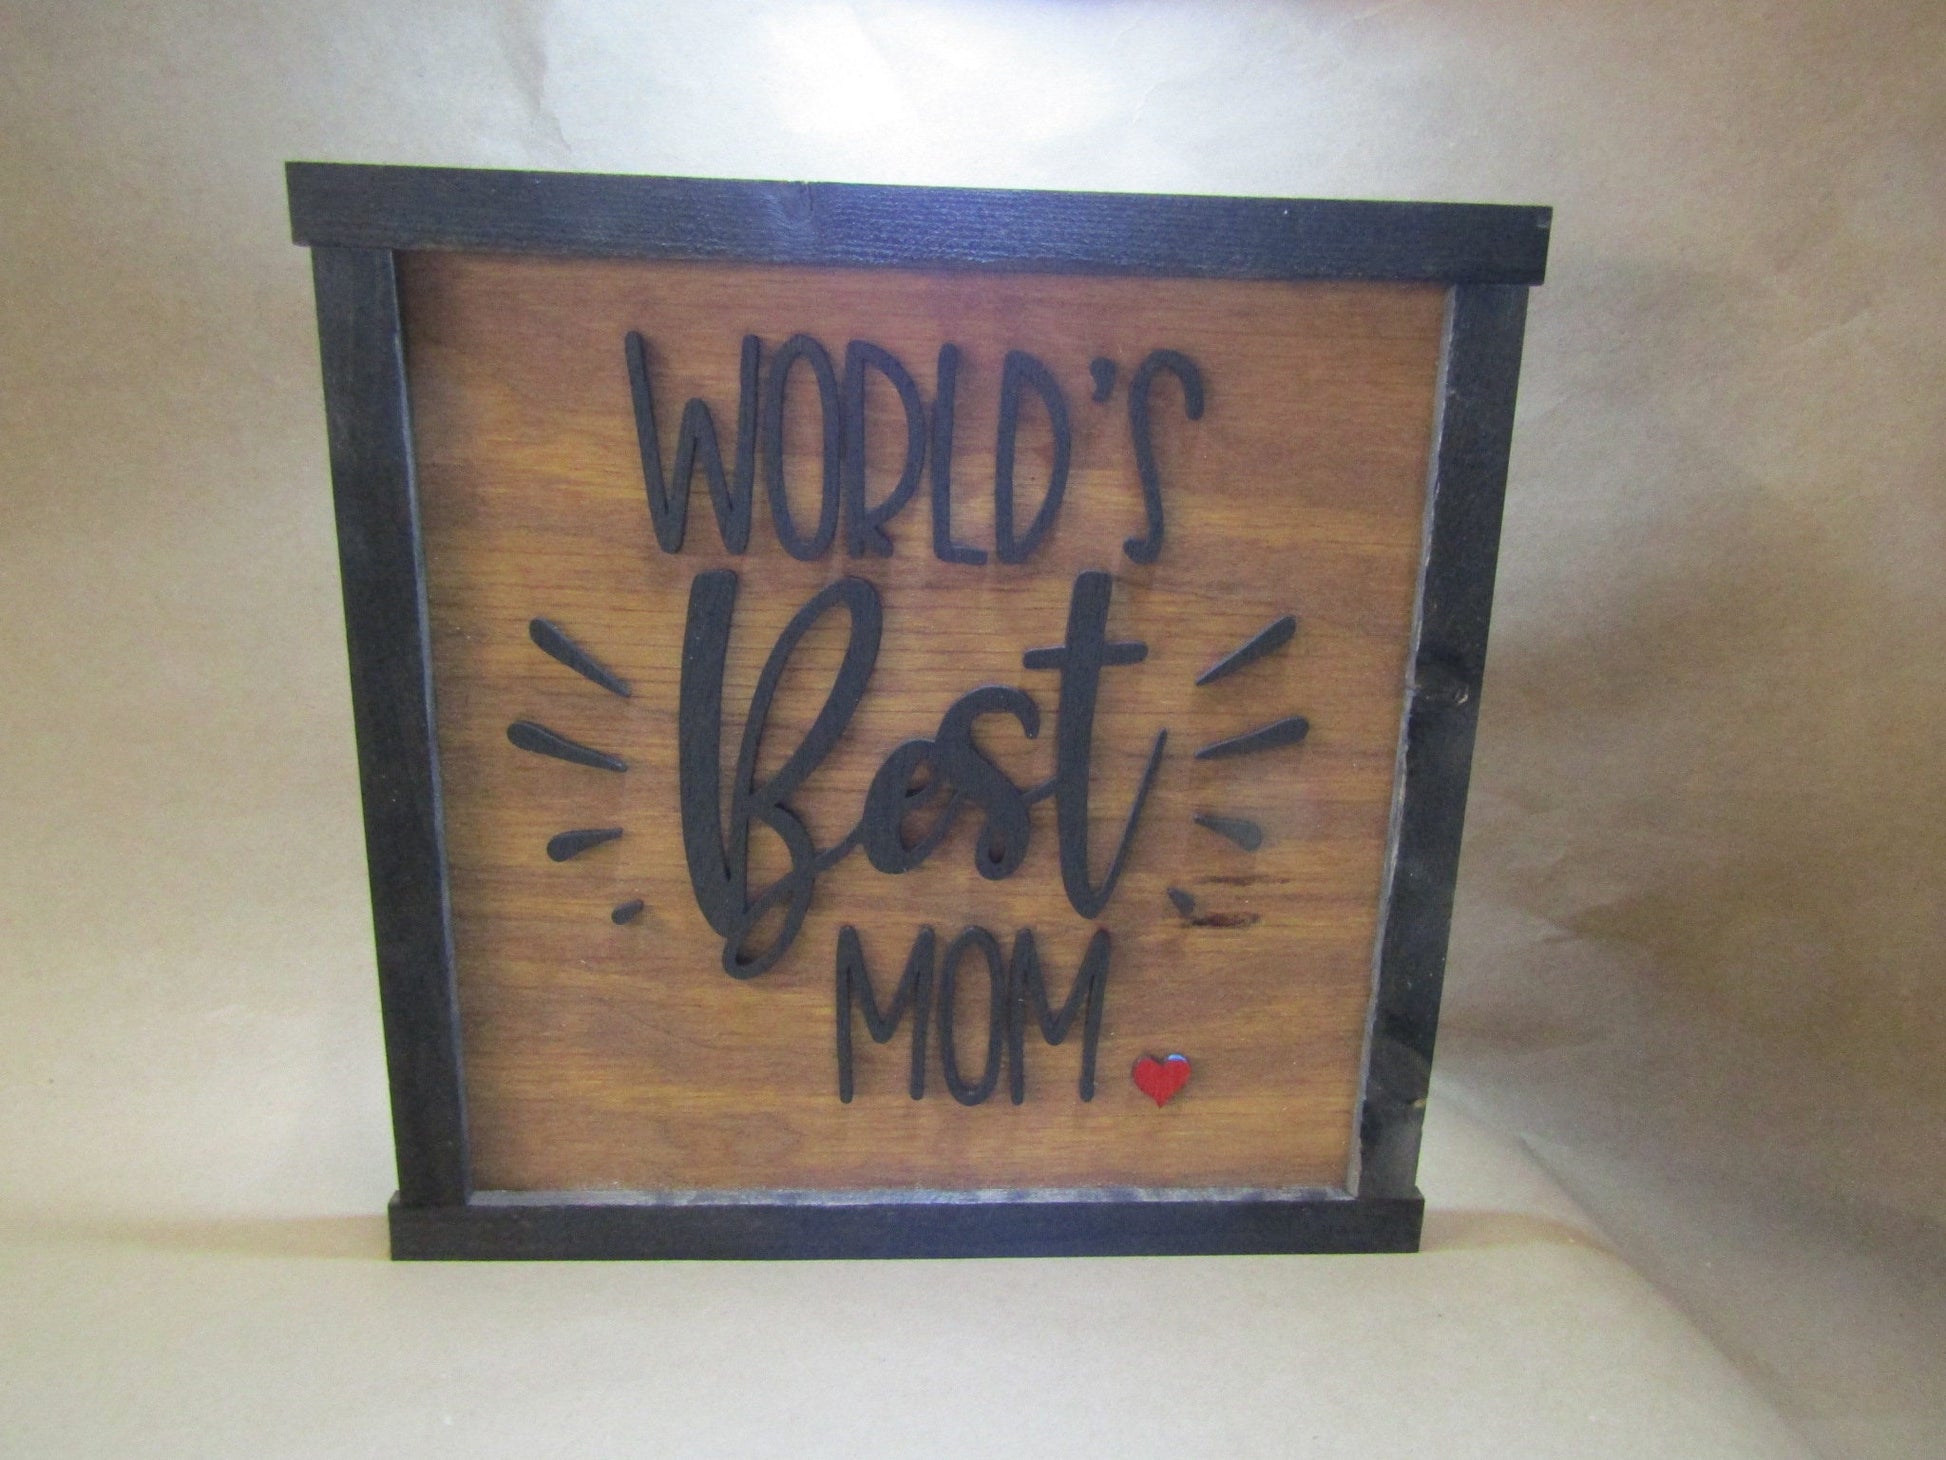 Mom Gift Mother's Day Wooden Sign Worlds Best Mom Heart Plaque Signage Raised Text 3D Framed Handmade Rustic Primitive Just Because Love